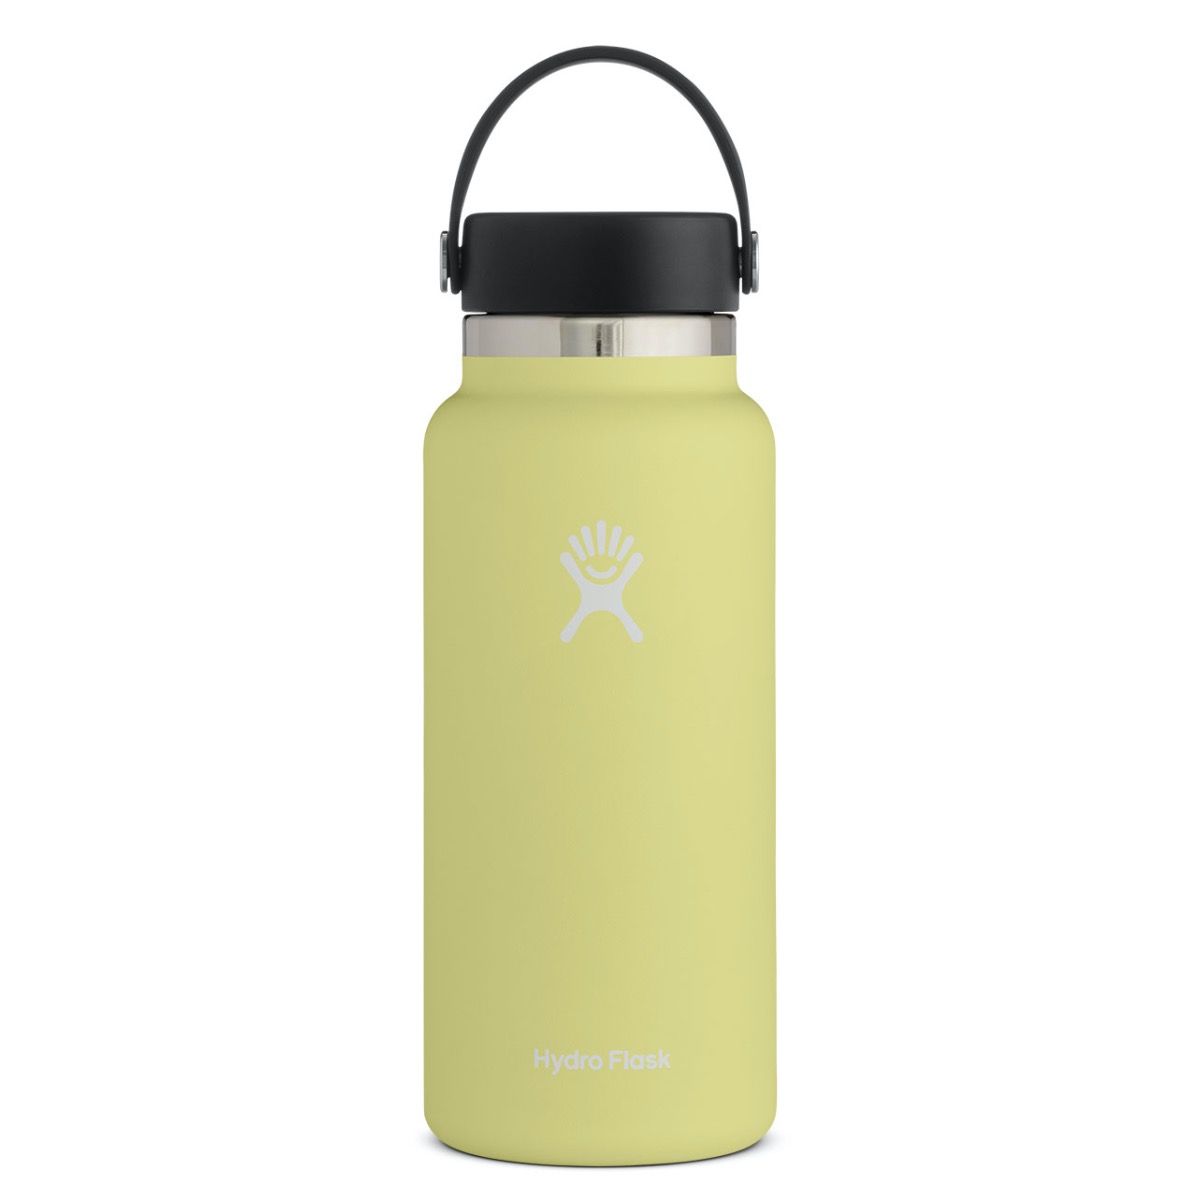 HydroFlask 12oz Cooler Cup, Hydro Flask